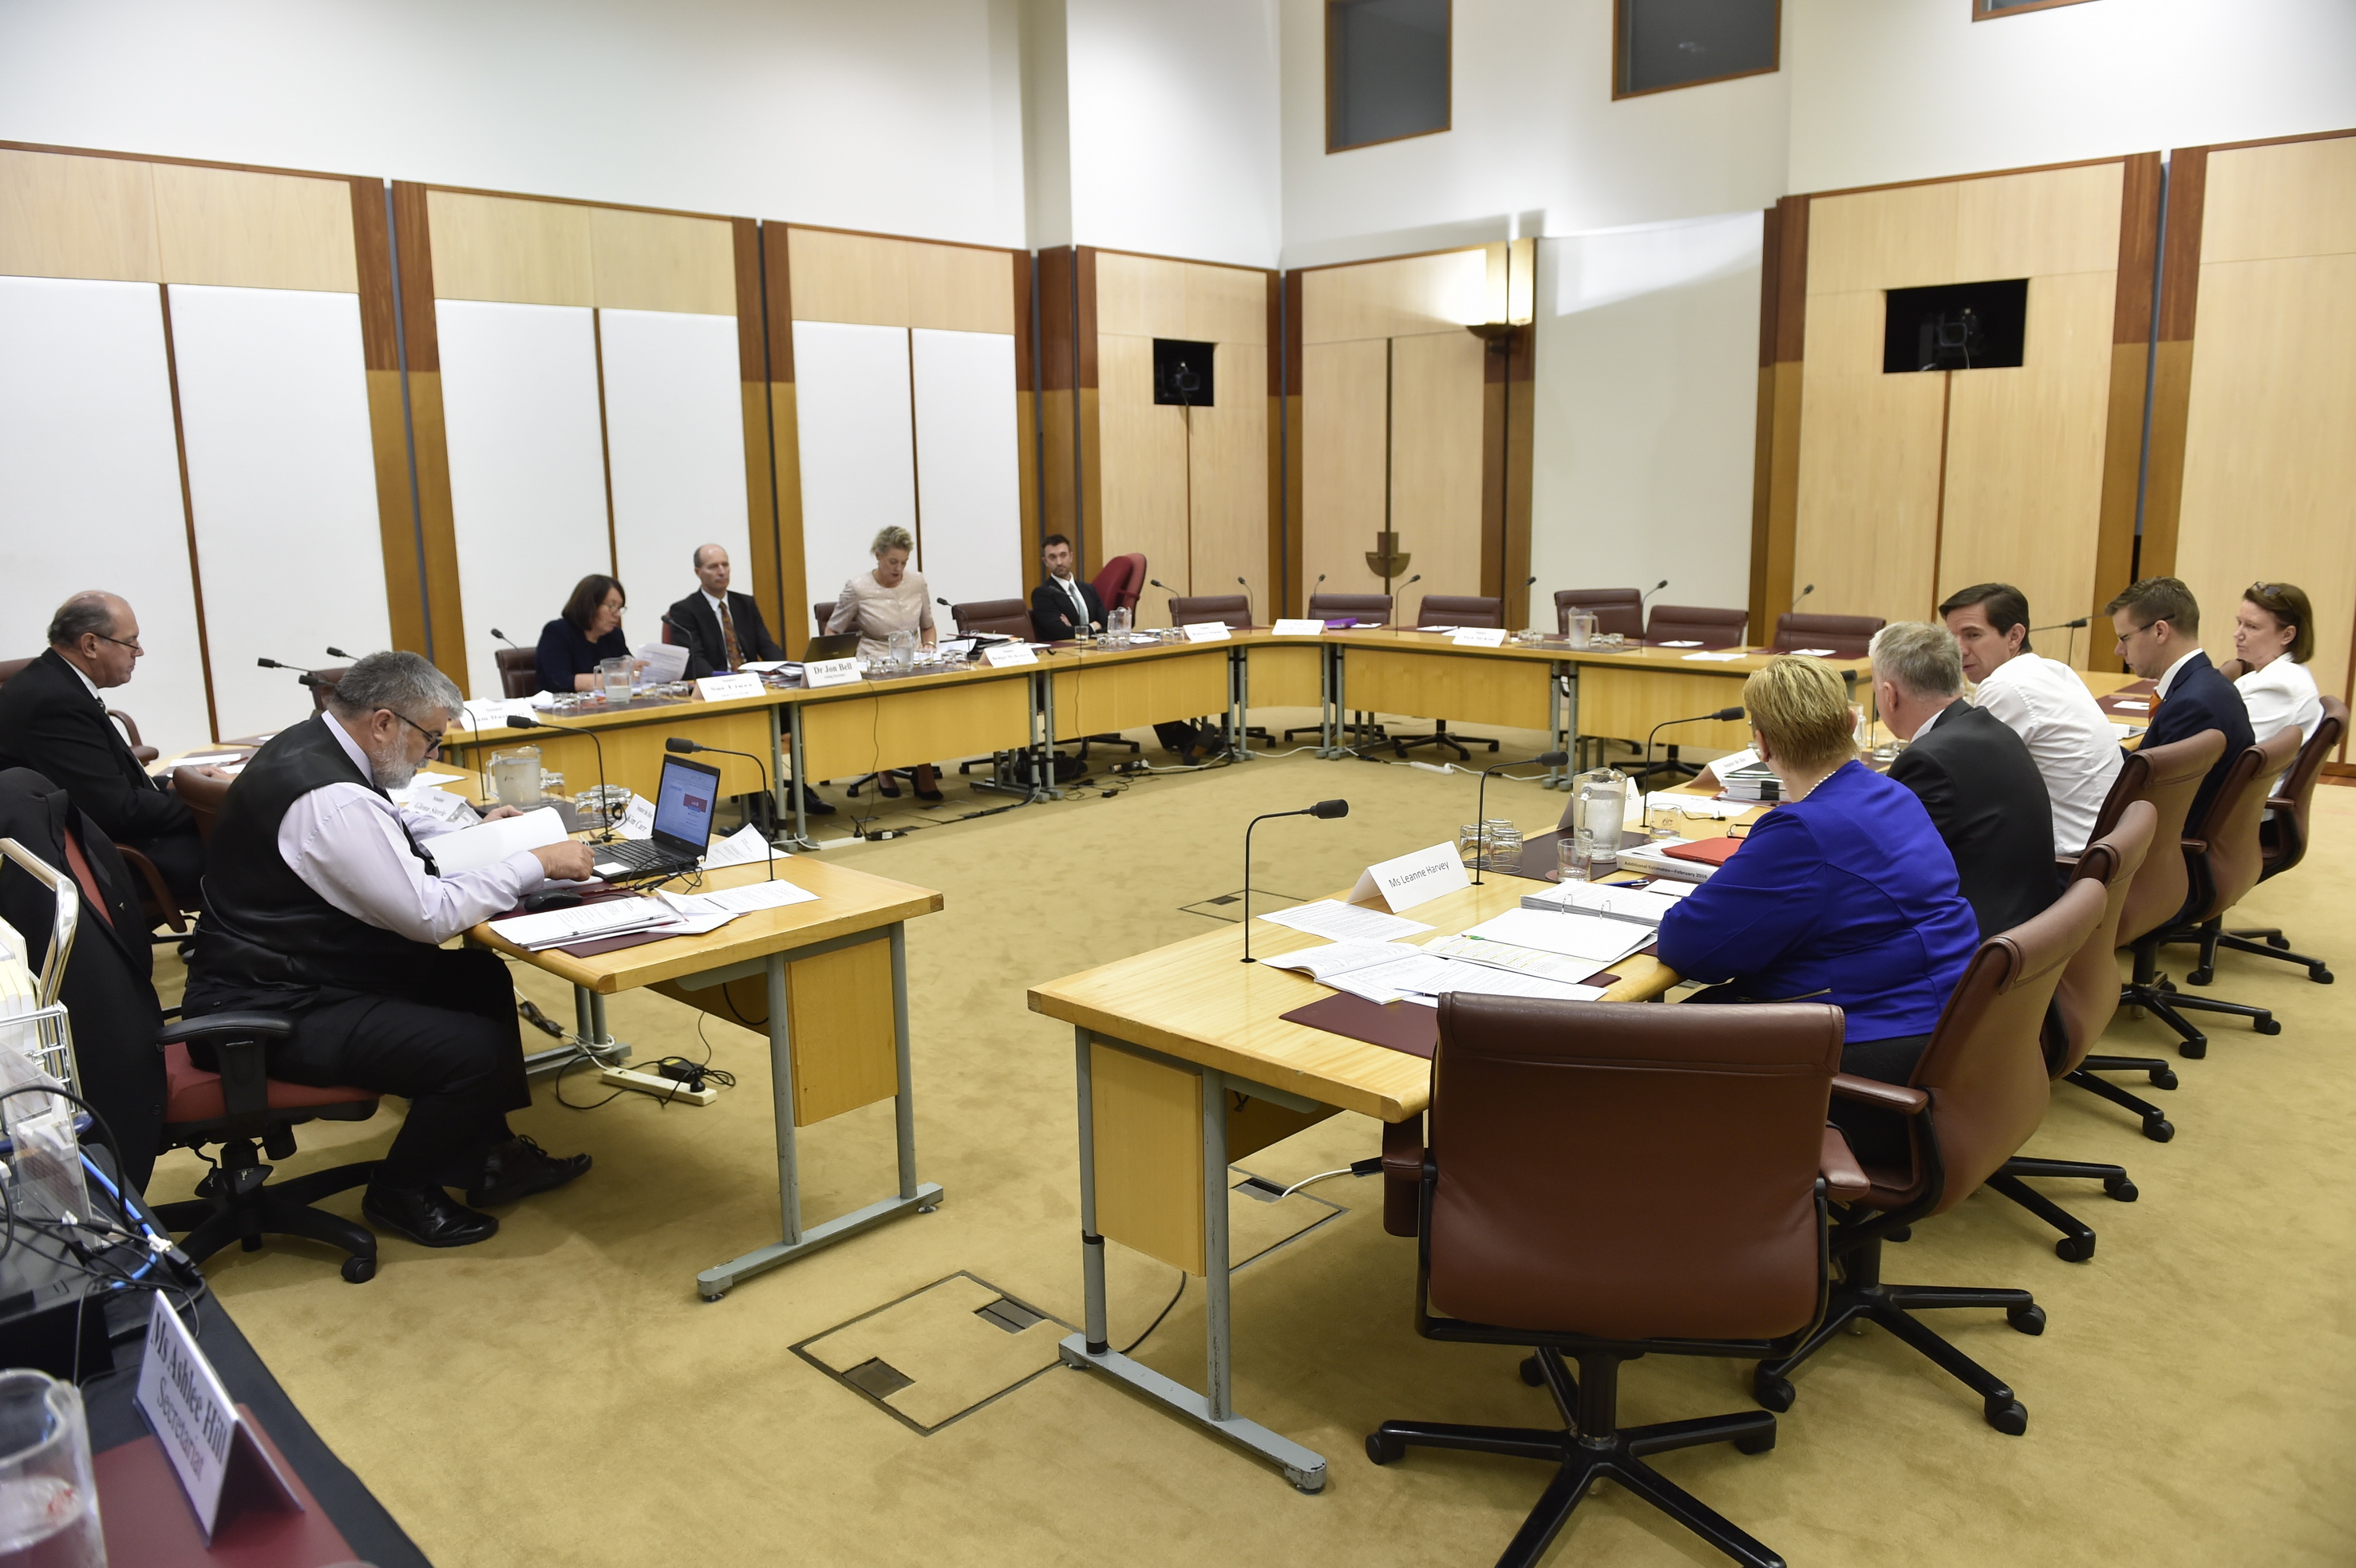 Education and Employment Legislation Committee questioning Senator Simon Birmingham, Minister for Education and Training, and officers from the Department of Education and Training and the Australian Research Council at an additional estimates hearing, 10 February 2016.  Seated facing witnesses clockwise from left: Senators Kim Carr, David Johnston and Sue Lines [Deputy Chair], Dr Jon Bell [Acting Secretary], Senators Bridget McKenzie [Chair] and Robert Simms. DPS Auspic.